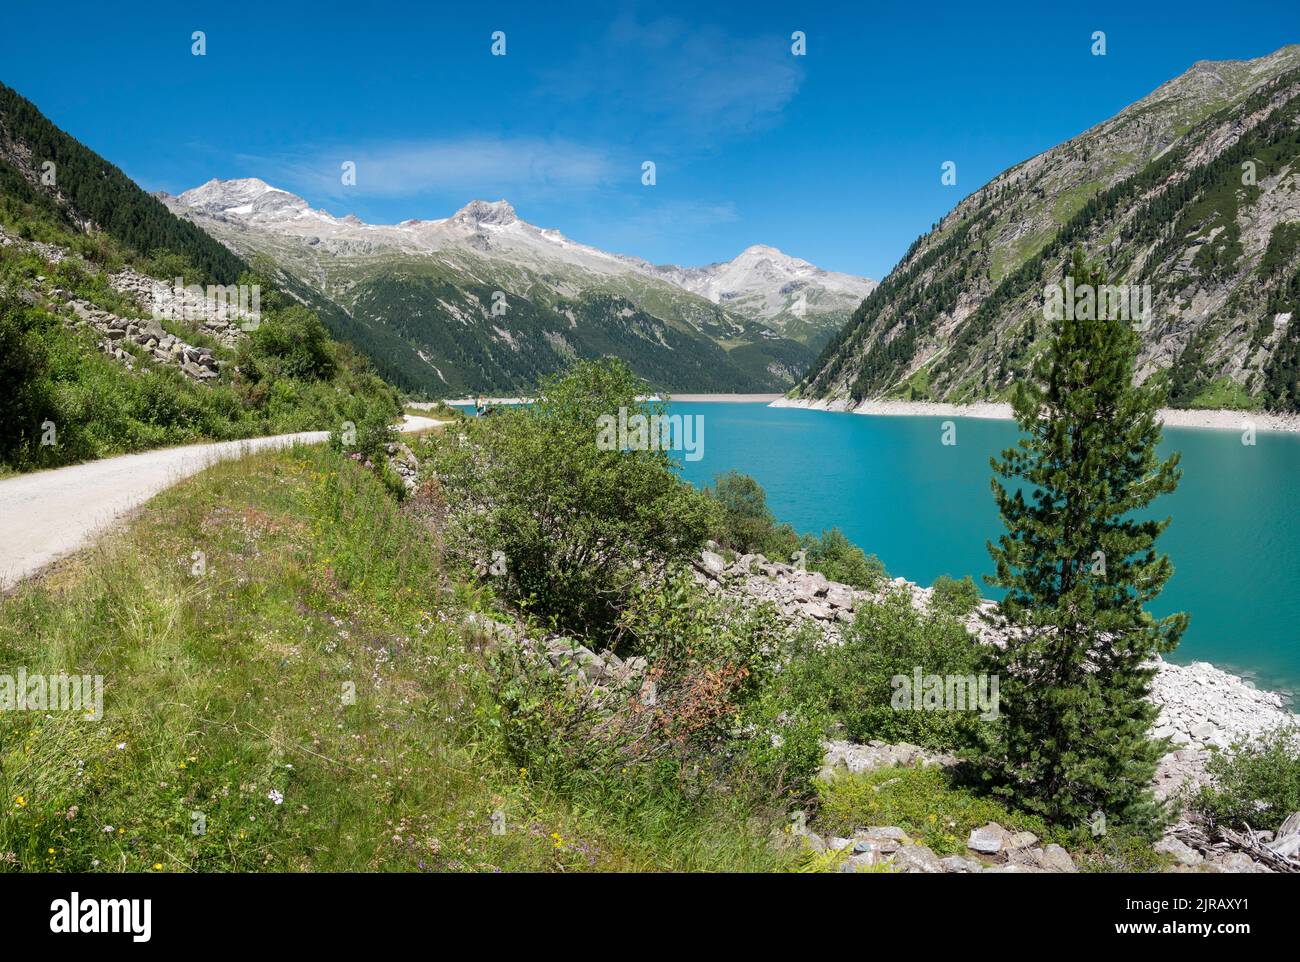 This is the Schlegeis Stausee hydroelectric reservoir at the head of the Zamsergrund valley near the resort town of Mayrhofen in the Zillertal Alps Stock Photo